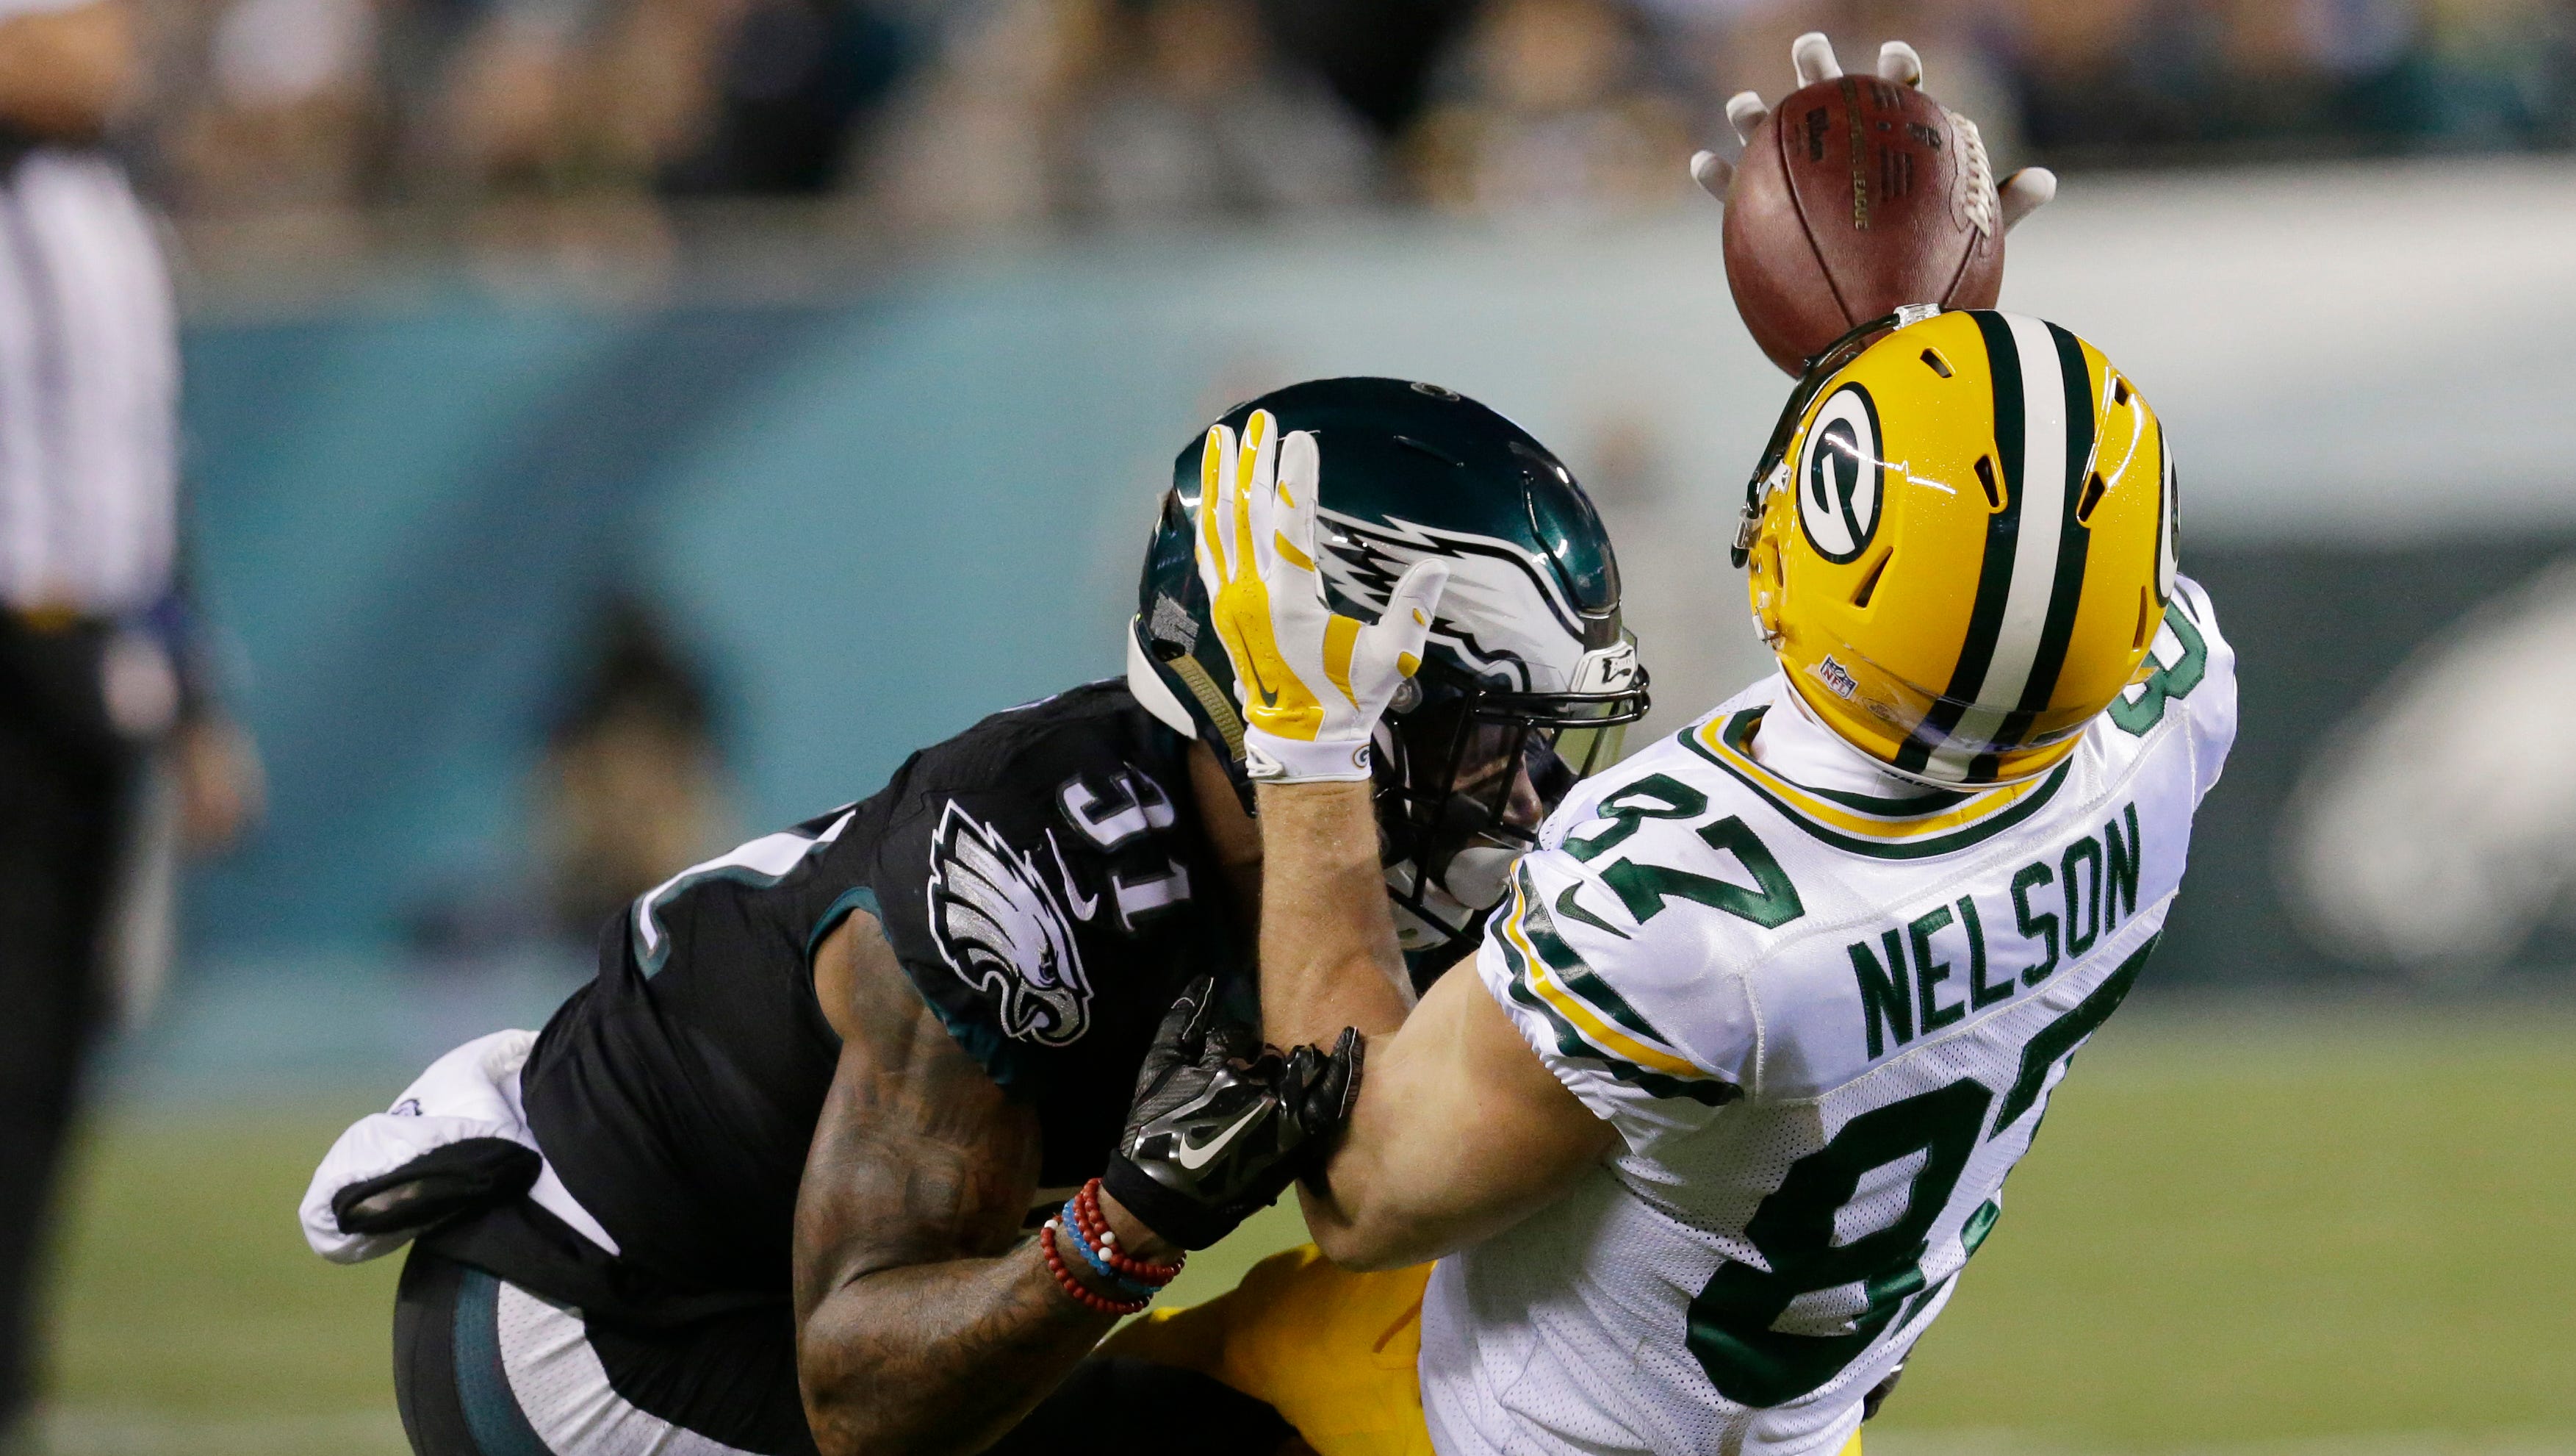 Wide receiver Jordy Nelson make a one-handed catch for a first down while being covered by Eagles cornerback Jalen Mills.